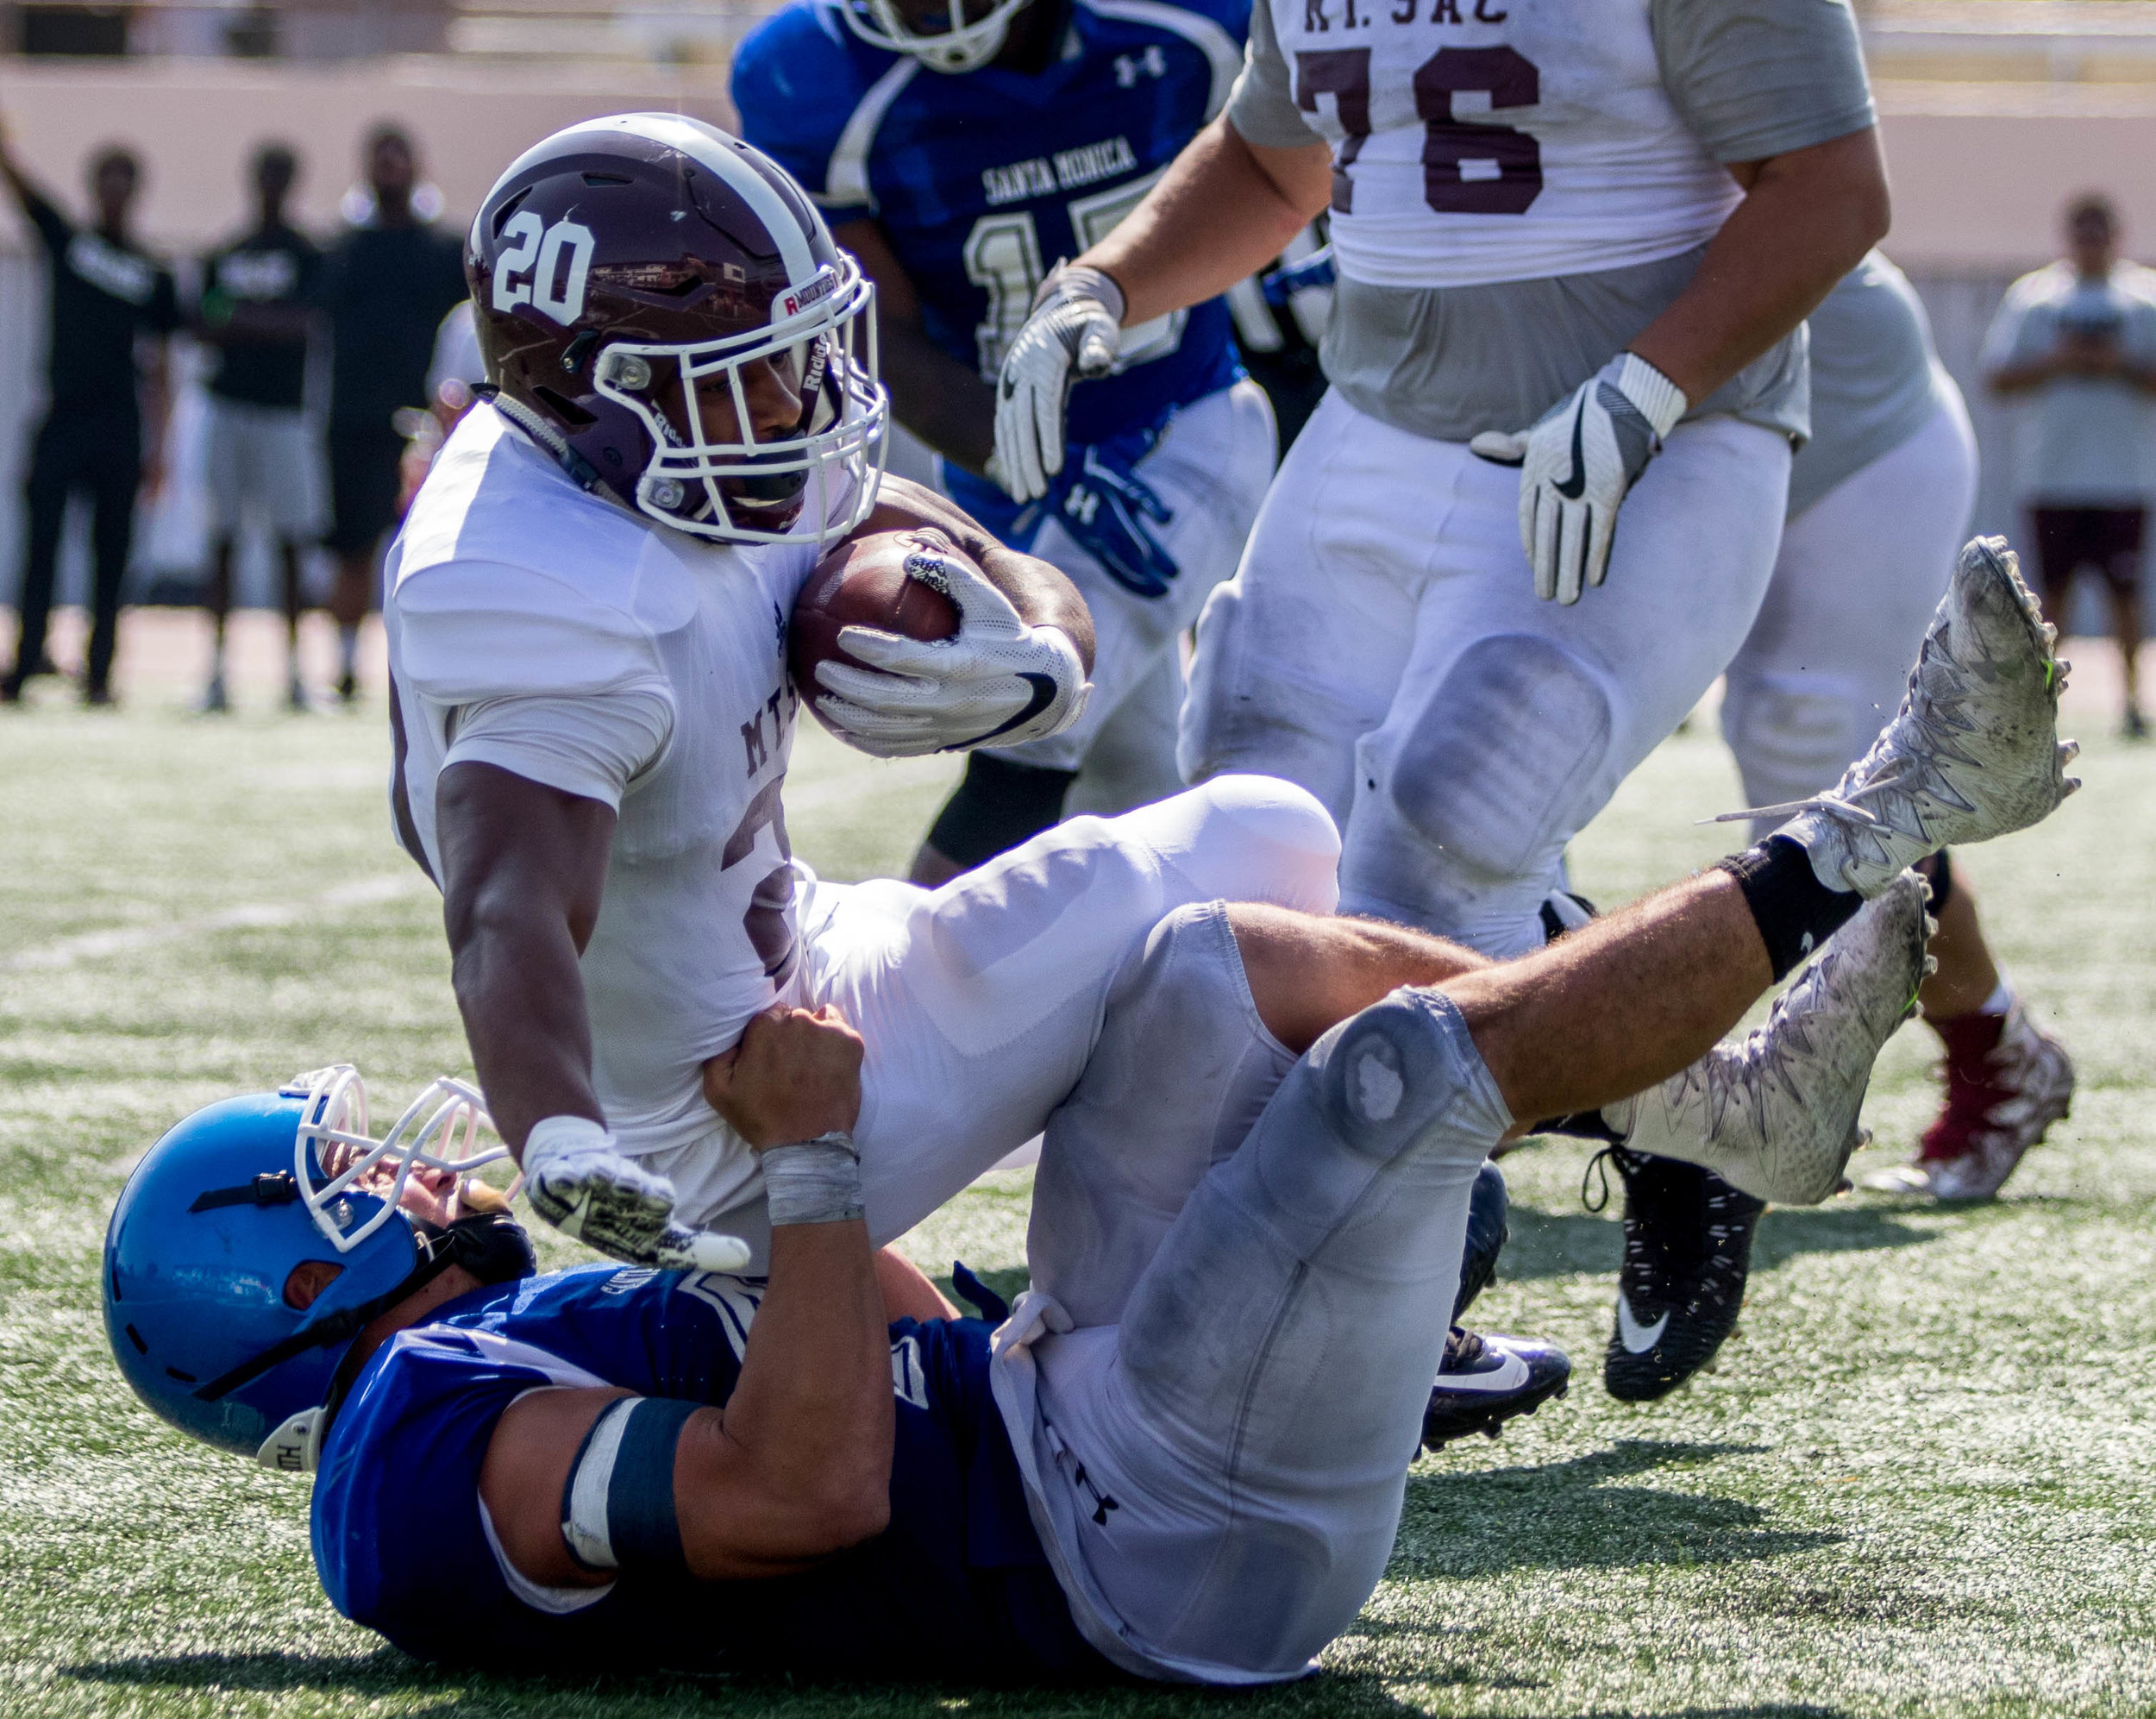  Santa Monica College Corsairs Sophomore Linebacker Chris Wein (Bottom) drags Mount San Antonio Mountees Sophomore Running Back Andre Walker (Middle, 20) to the ground to complete a tackle at the Corsair Stadium located on the Santa Monica College Ma